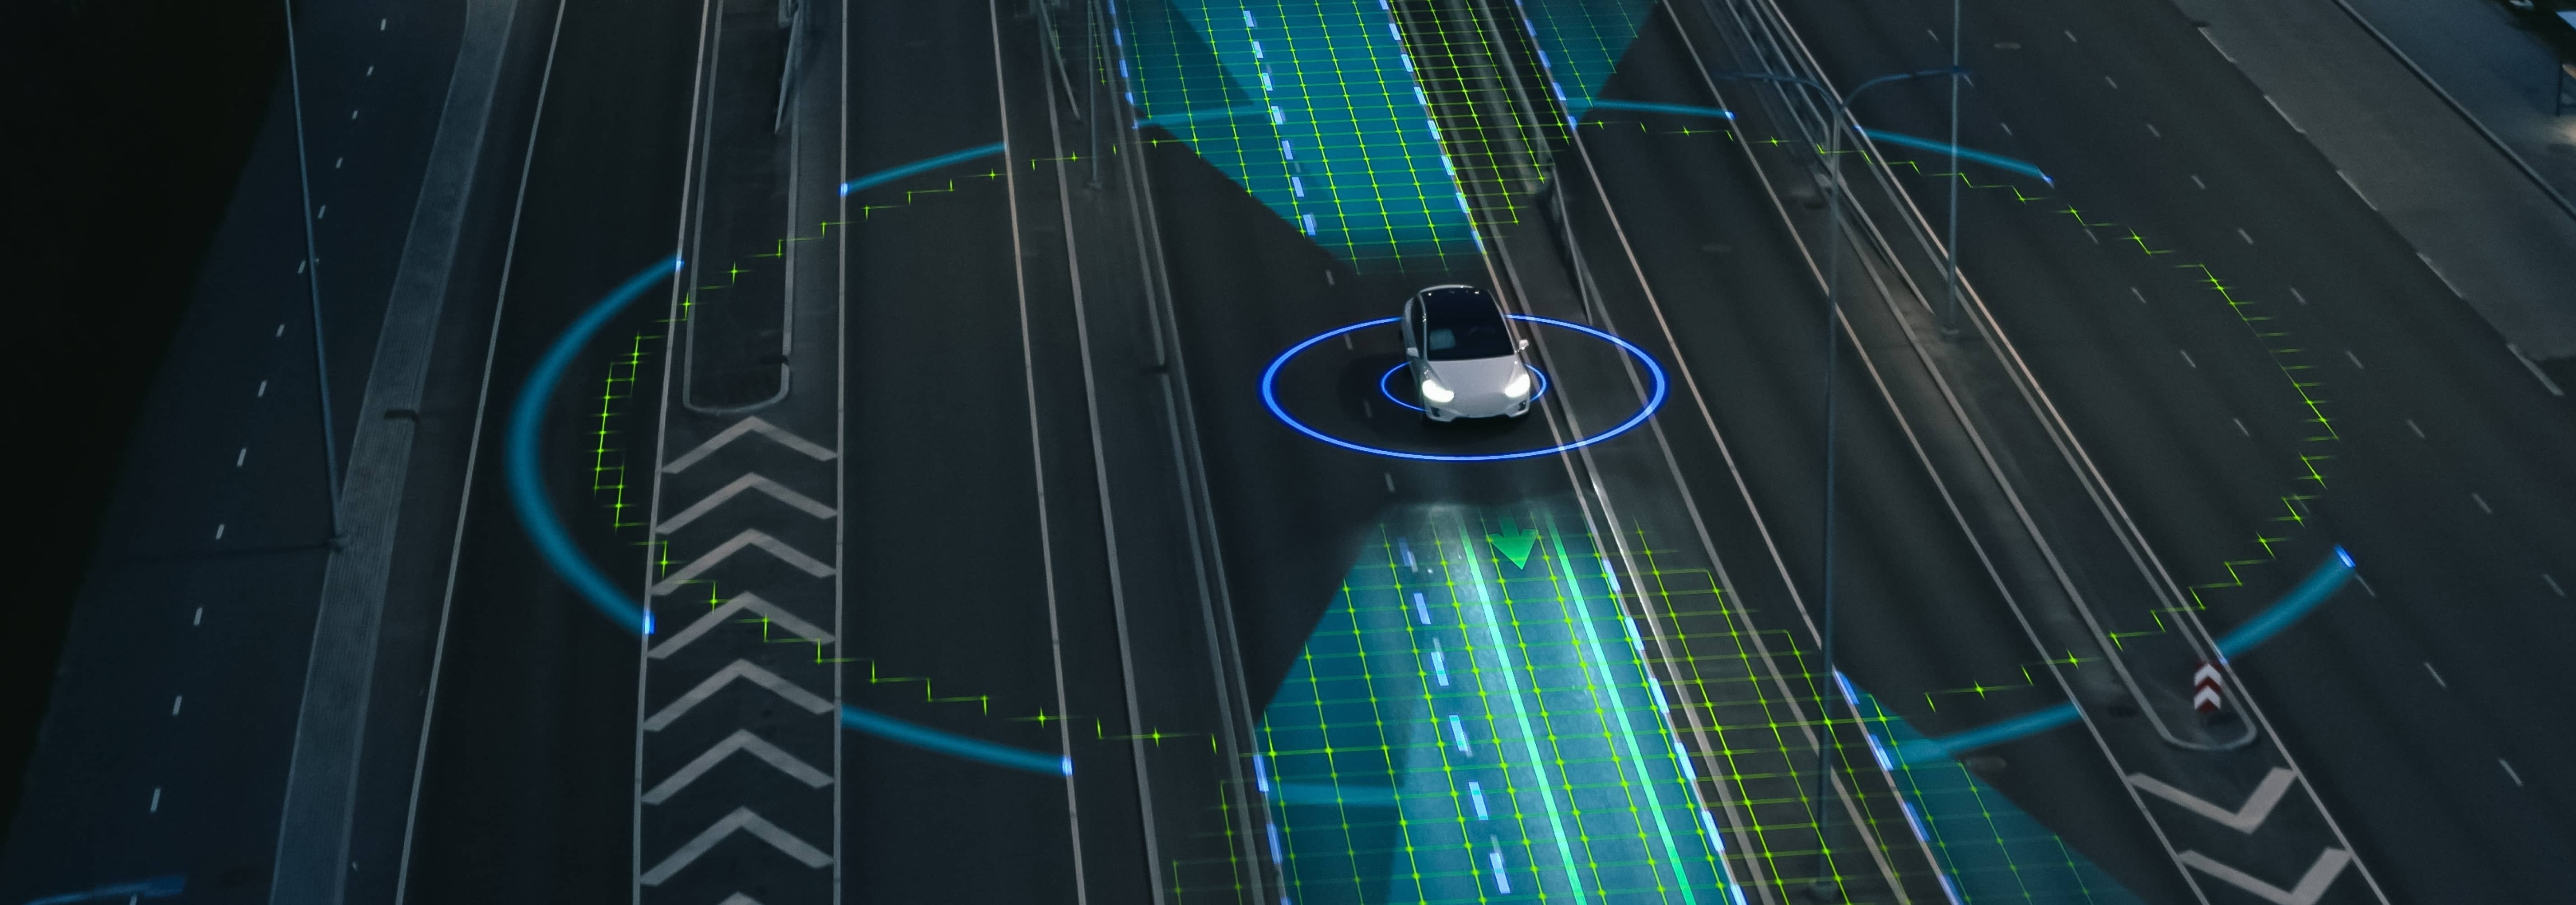 learning for autonomous driving